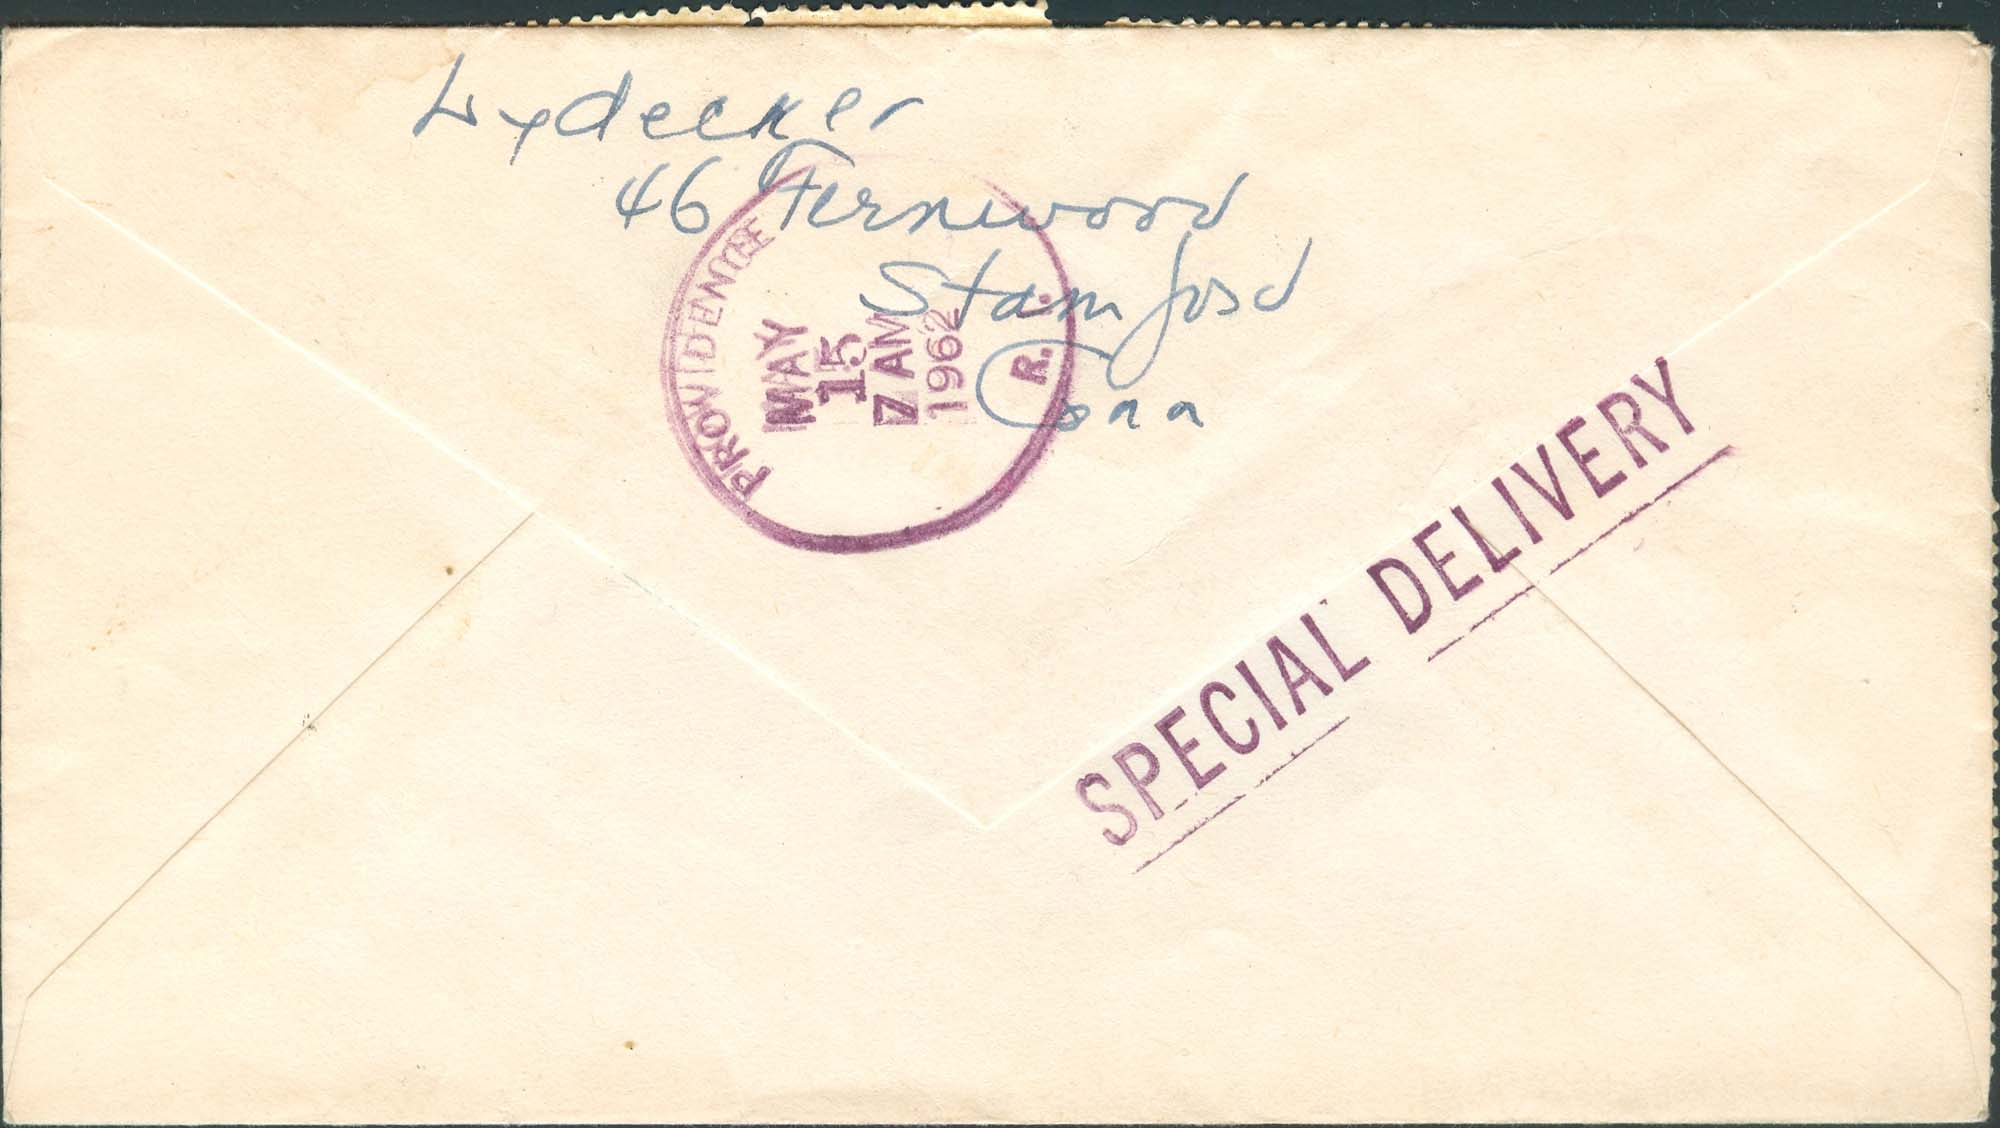 1962, May 14th, 9:30 PM. Stamford, CN to Cranston, RI. 4¢ paid domestic fee, 30¢ paid the special delivery service - Back